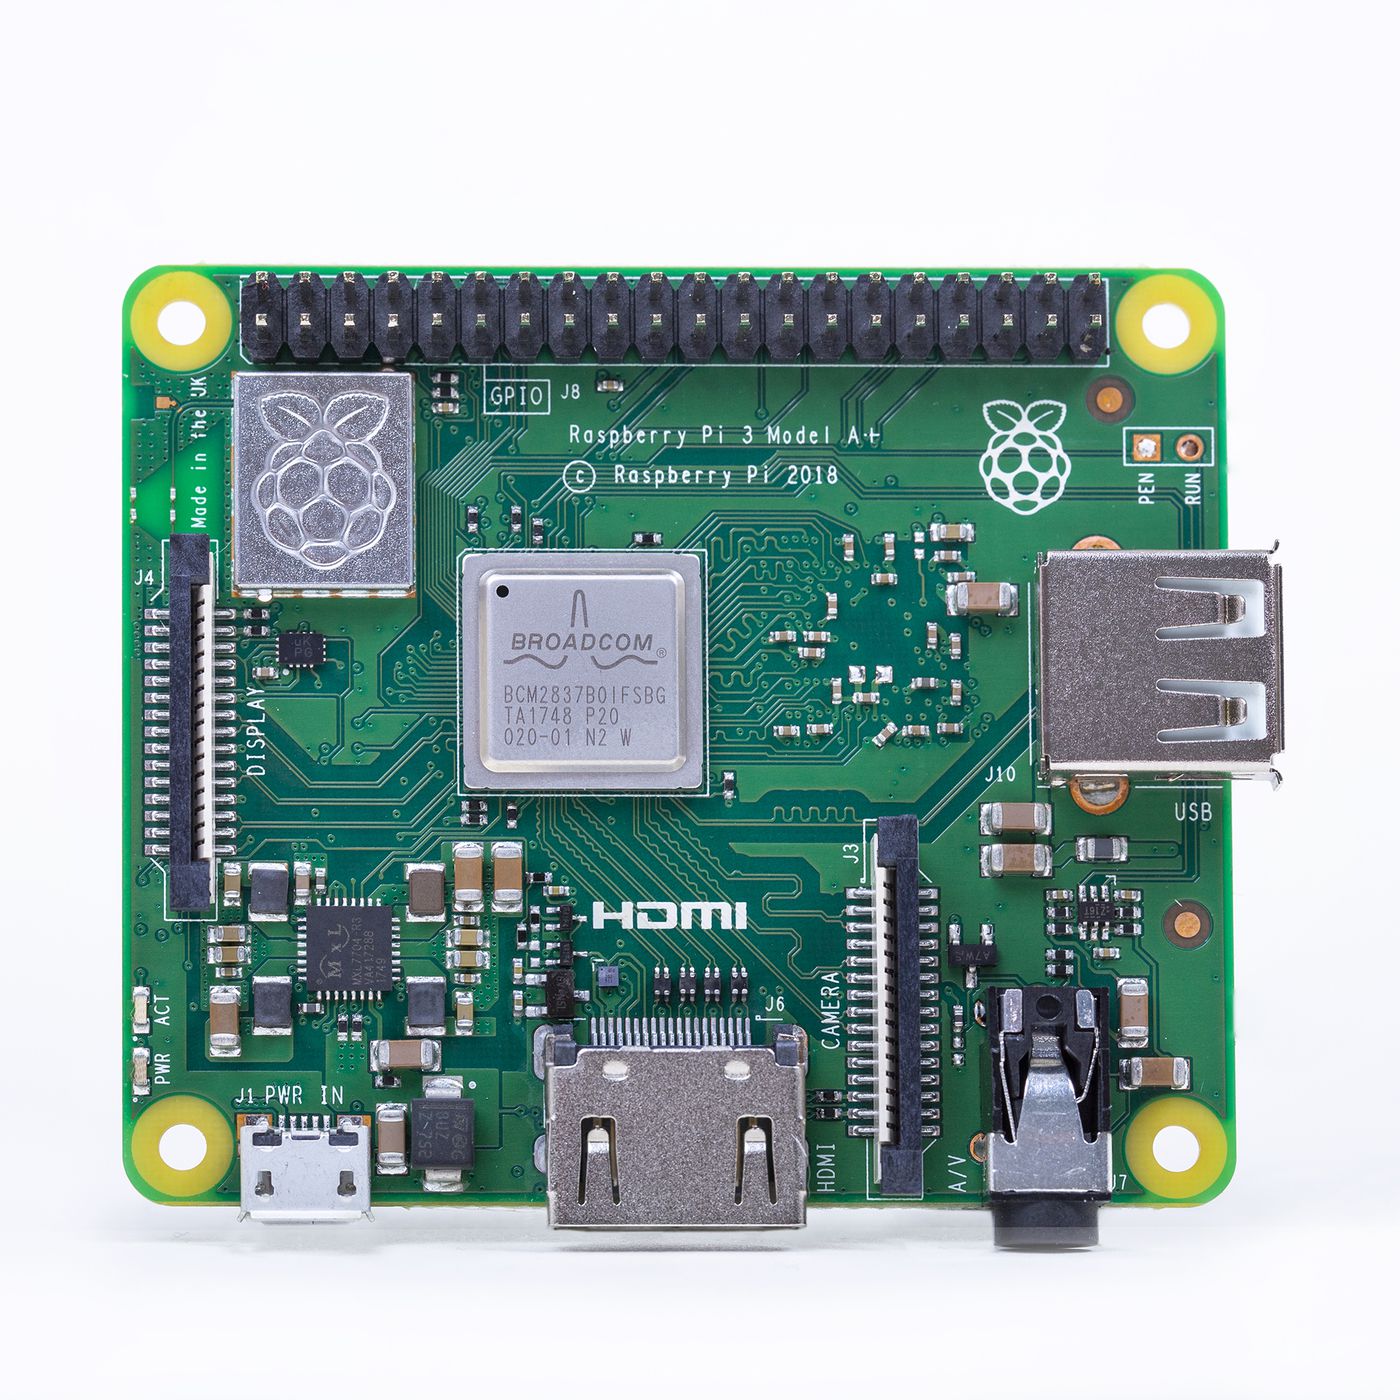 Raspberry Pi Made A Cheaper Version Of Its Most Powerful Pc The